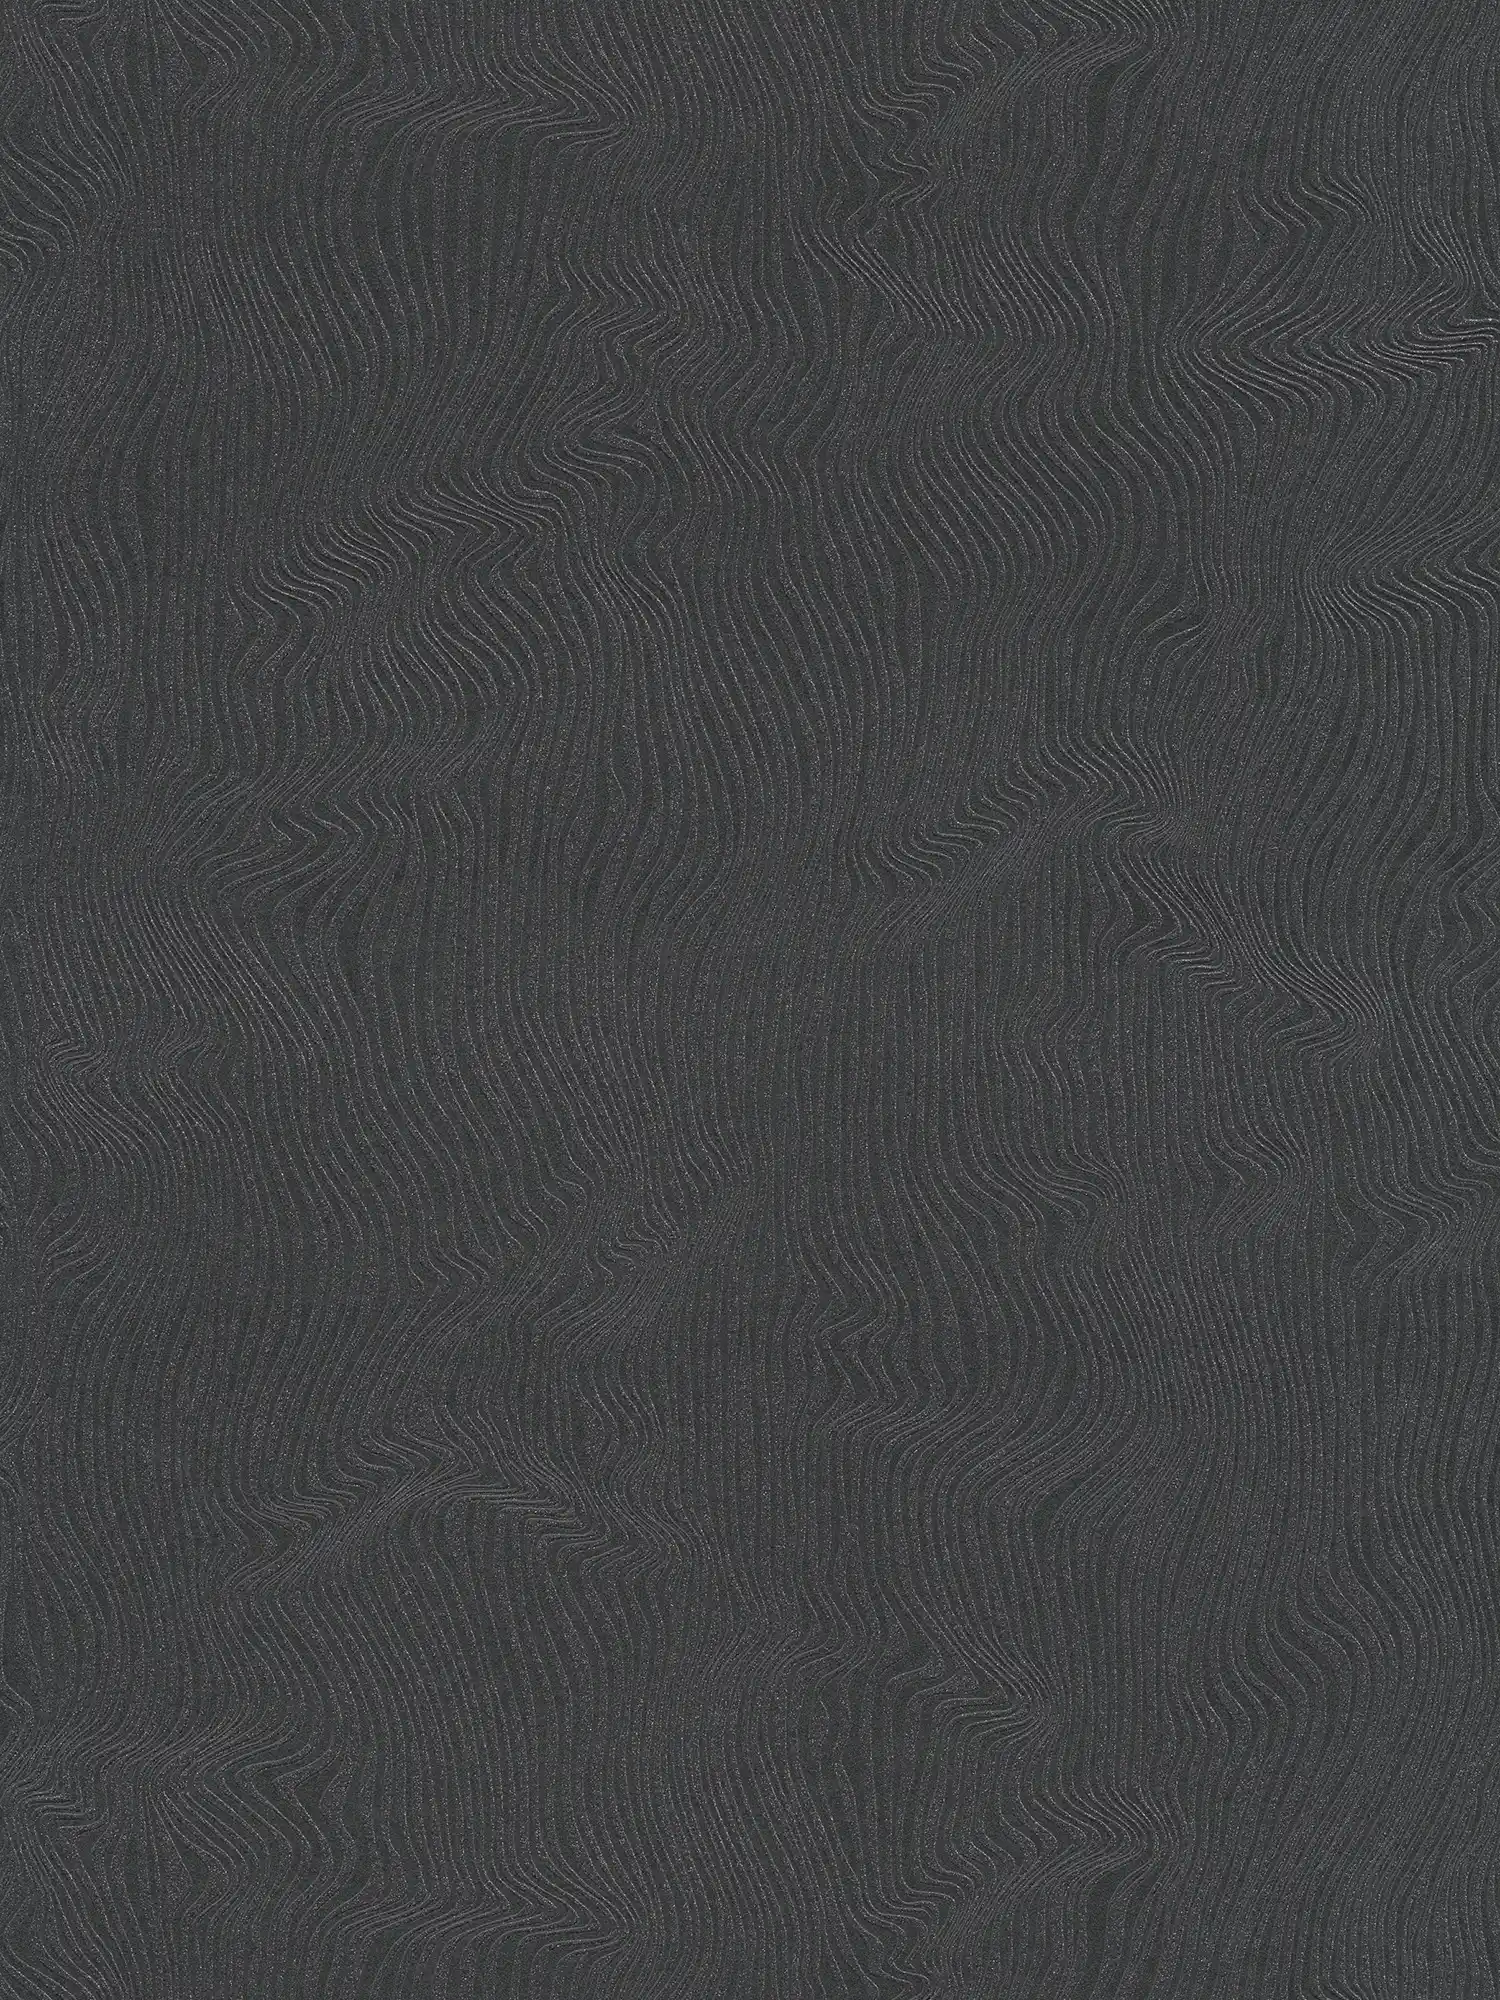 Plain wallpaper with moving line pattern - black
